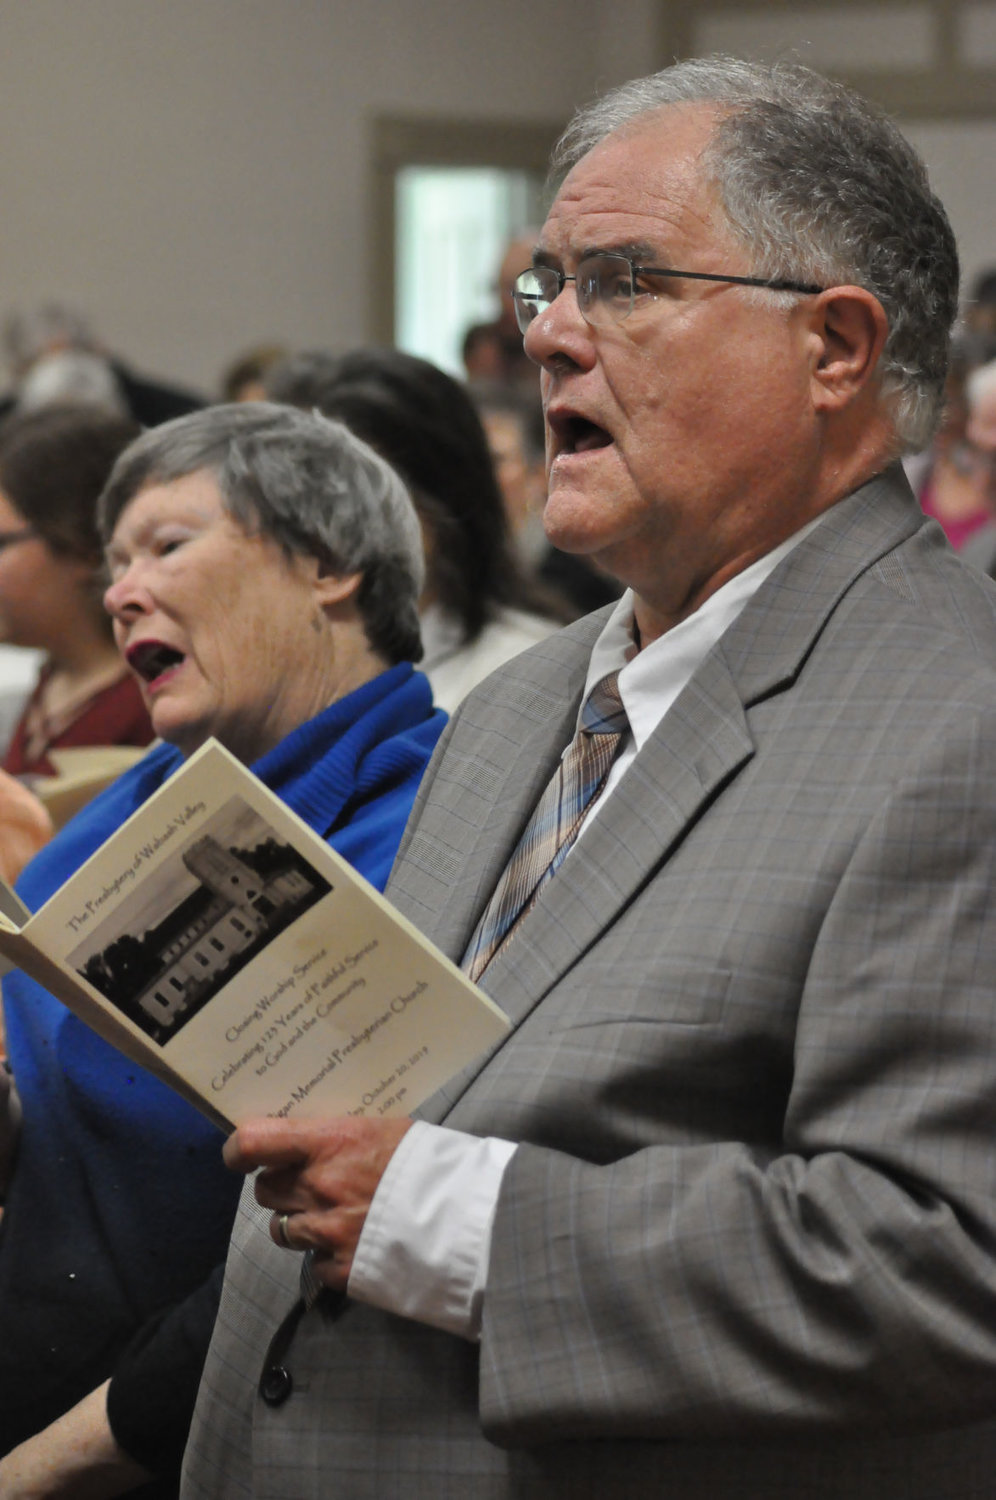 Mark Strothman and his wife, Sharon Maddox, sing during the final worship service Sunday at Milligan Memorial Presbyterian Church. Strothman was pastor of the church in the 1980s.